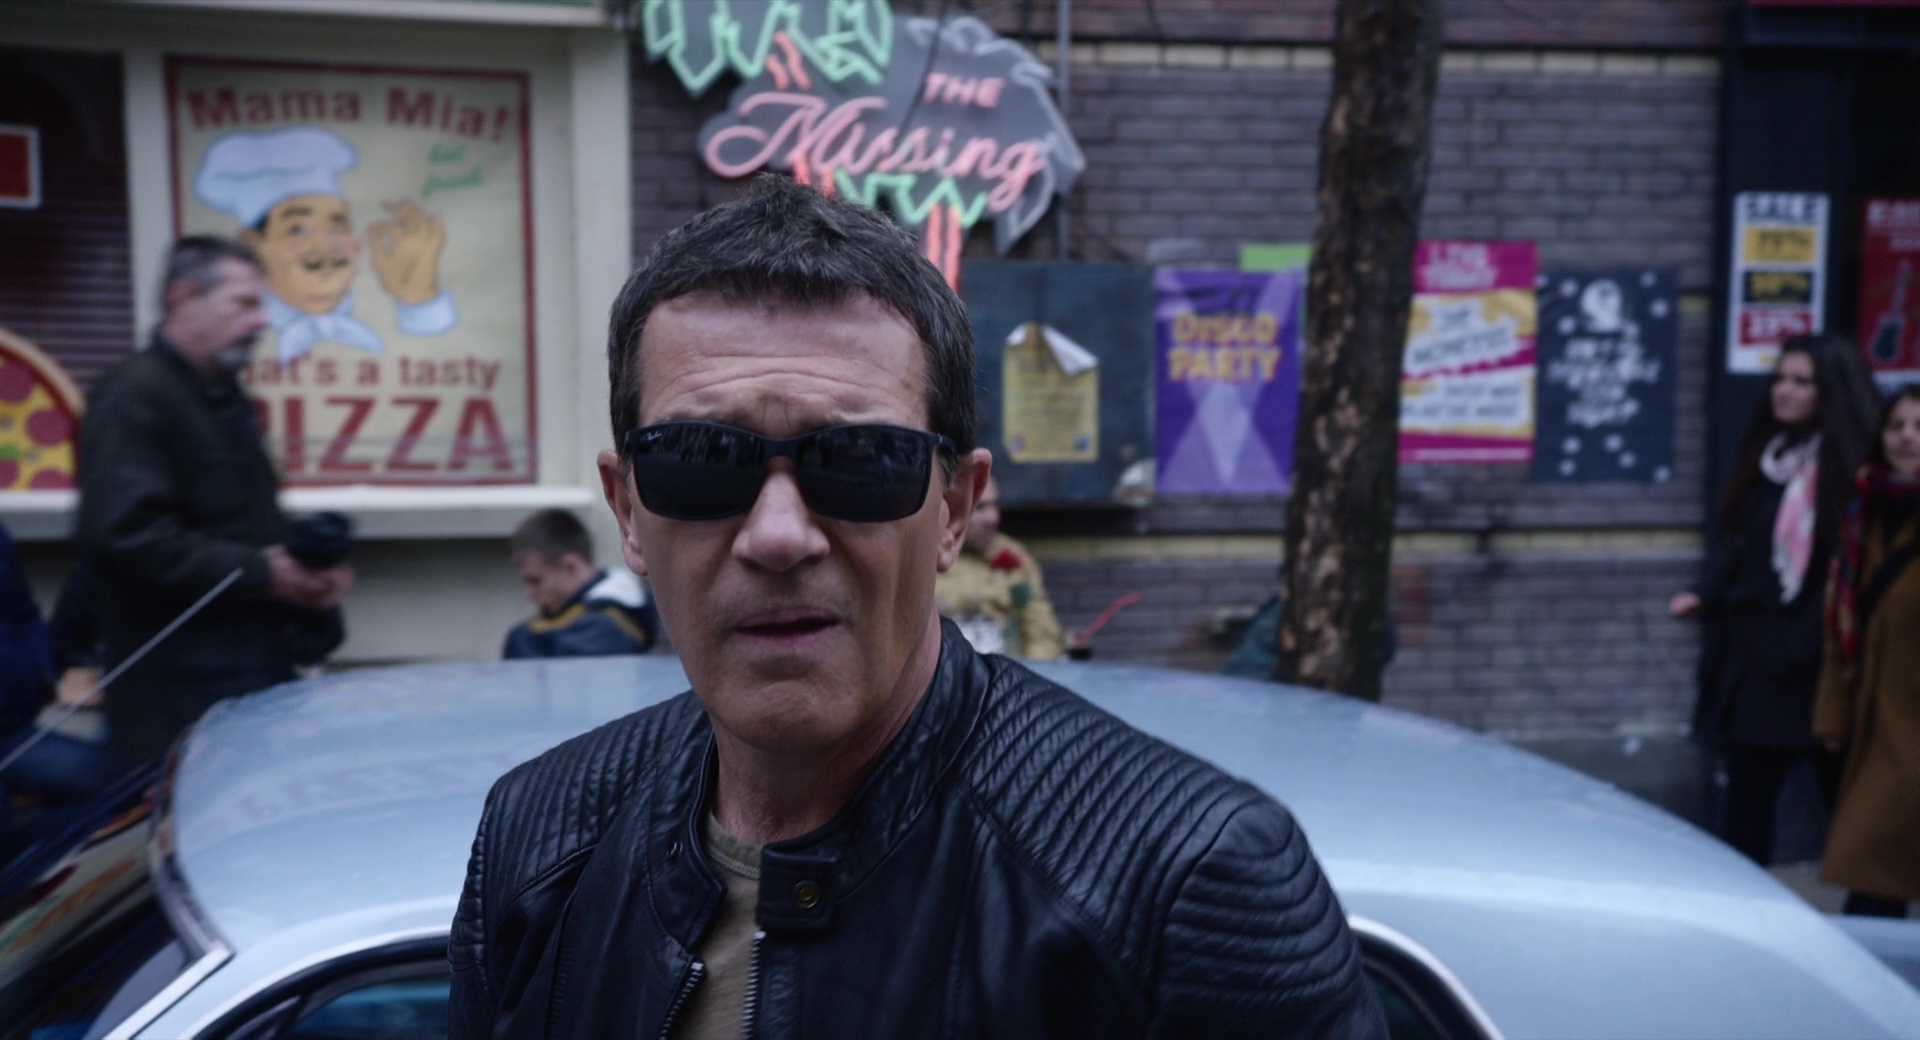 Ray-Ban Sunglasses Worn by Antonio Banderas in Acts Of Vengeance (2017) Movie